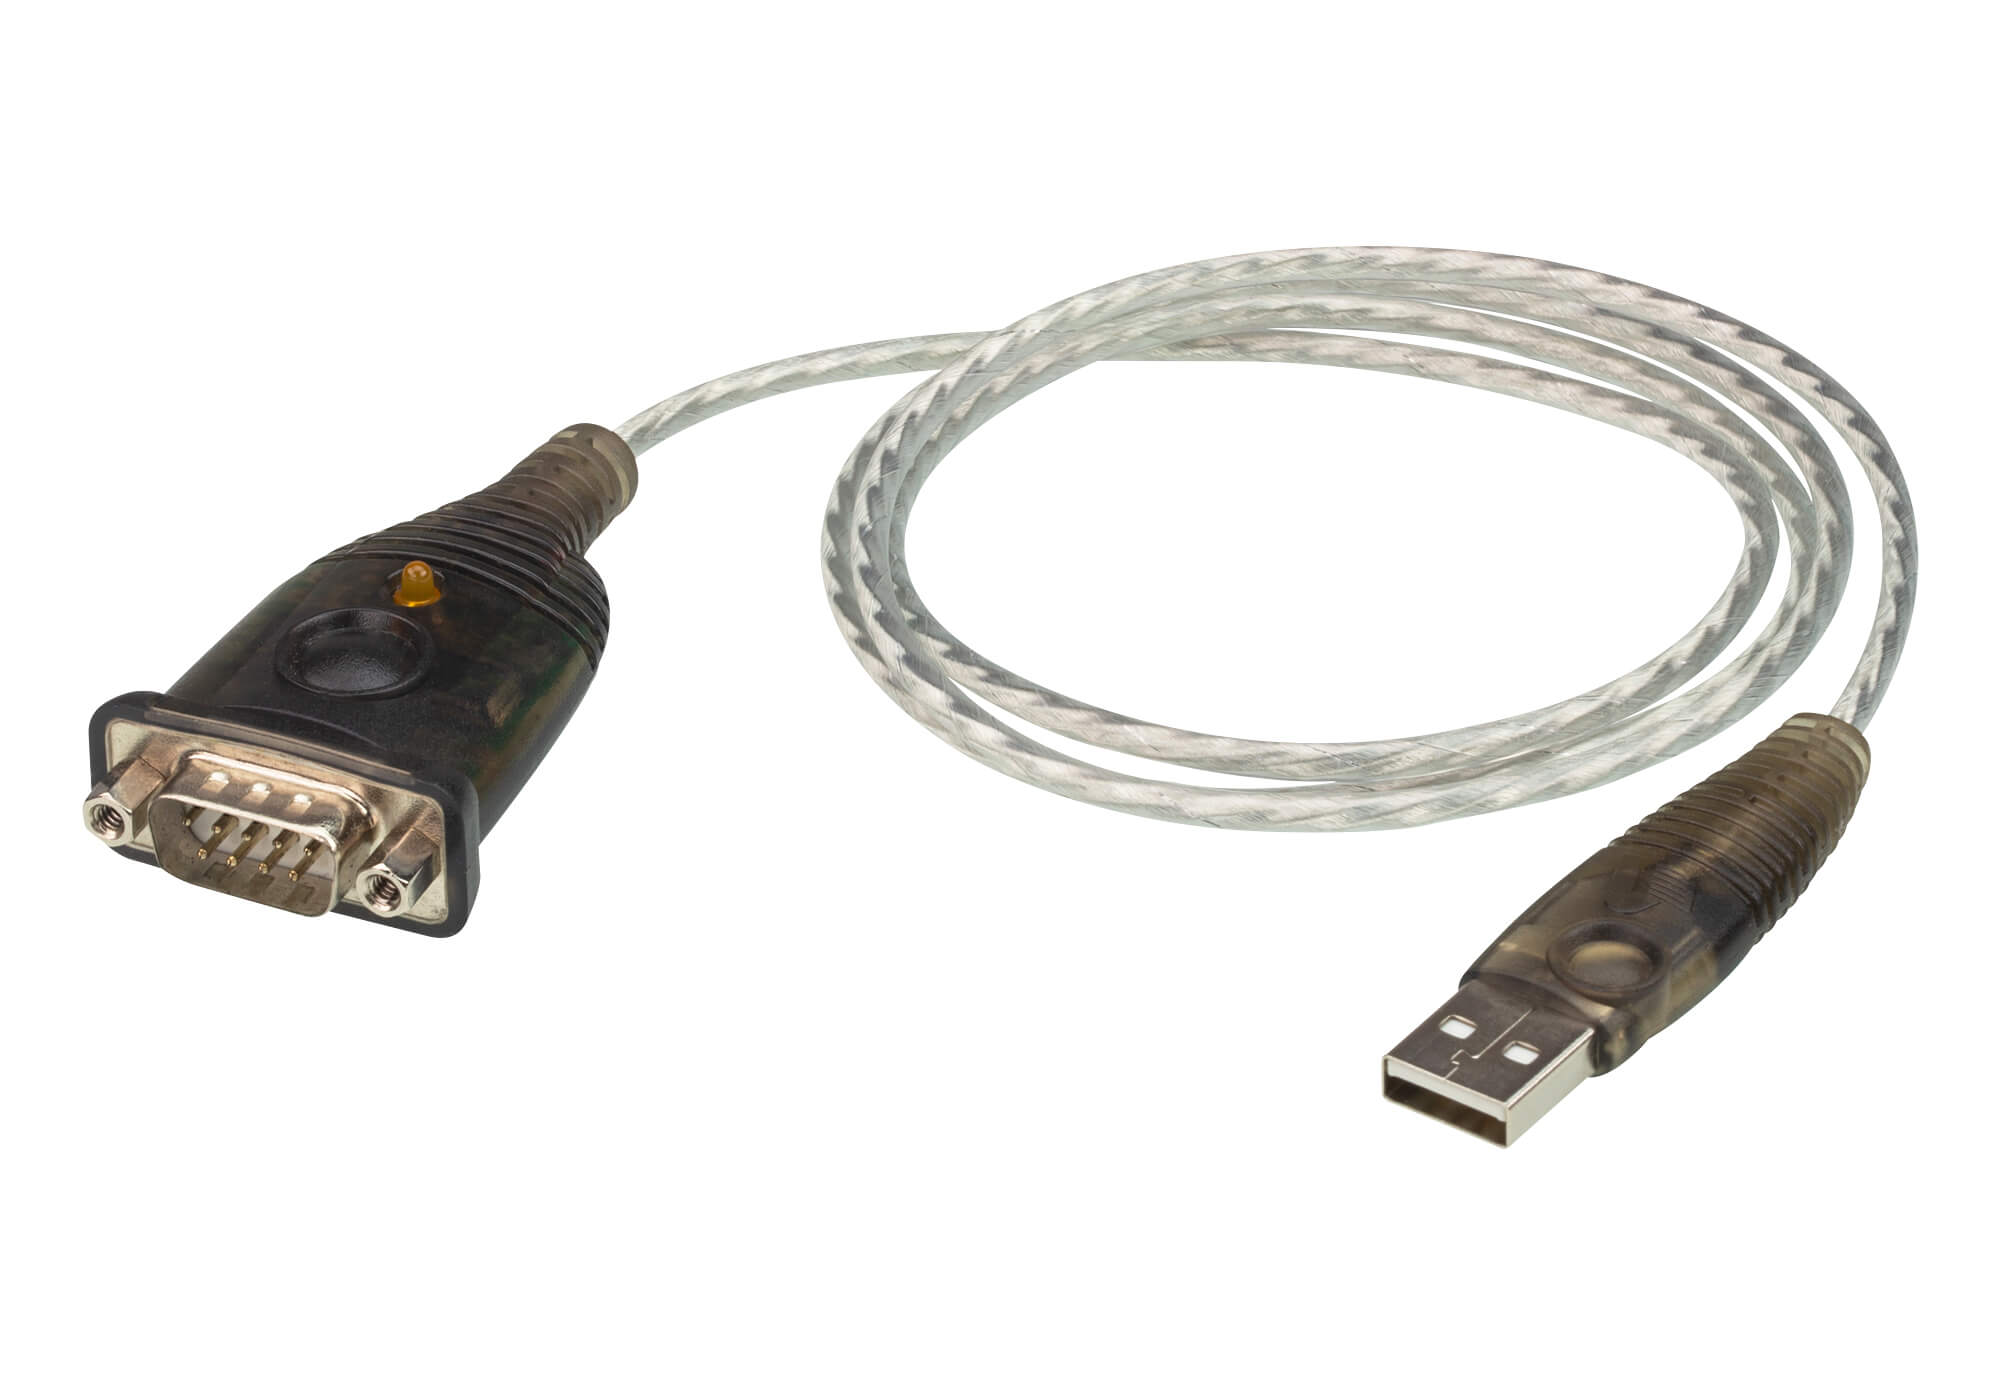 Aten USB to RS232 converter with 1m cable